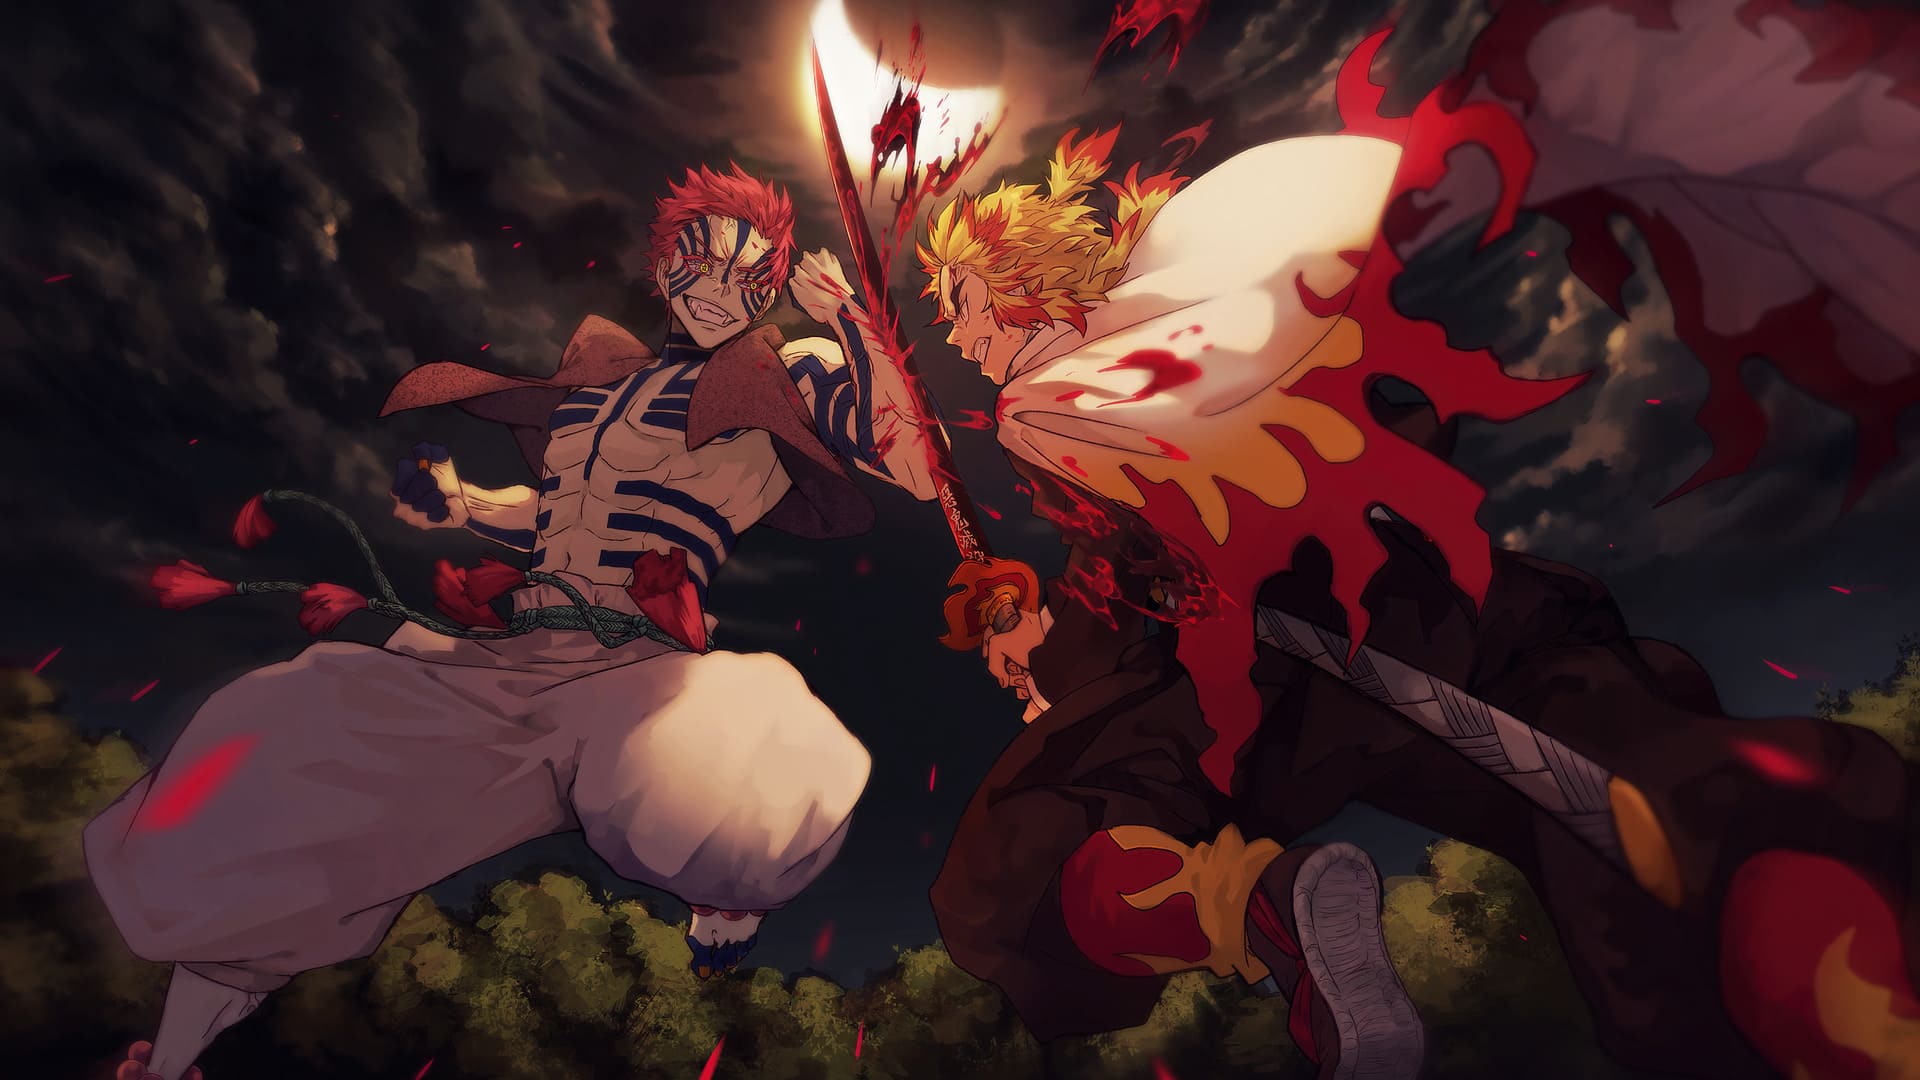 Check the link to download HD wallpapers of Demon Slayer and more